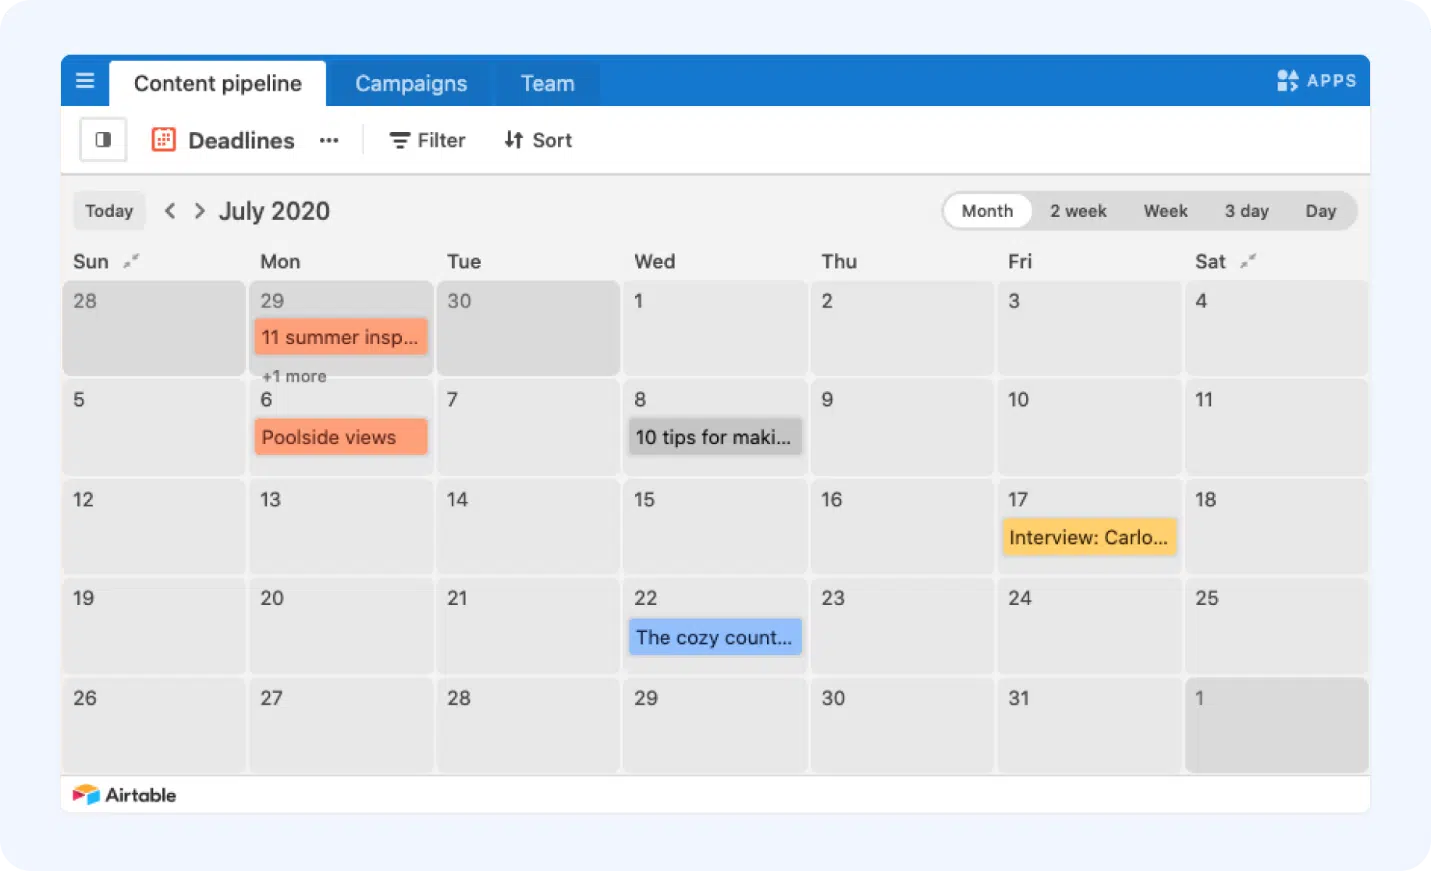 An example of a content calendar using Airtable